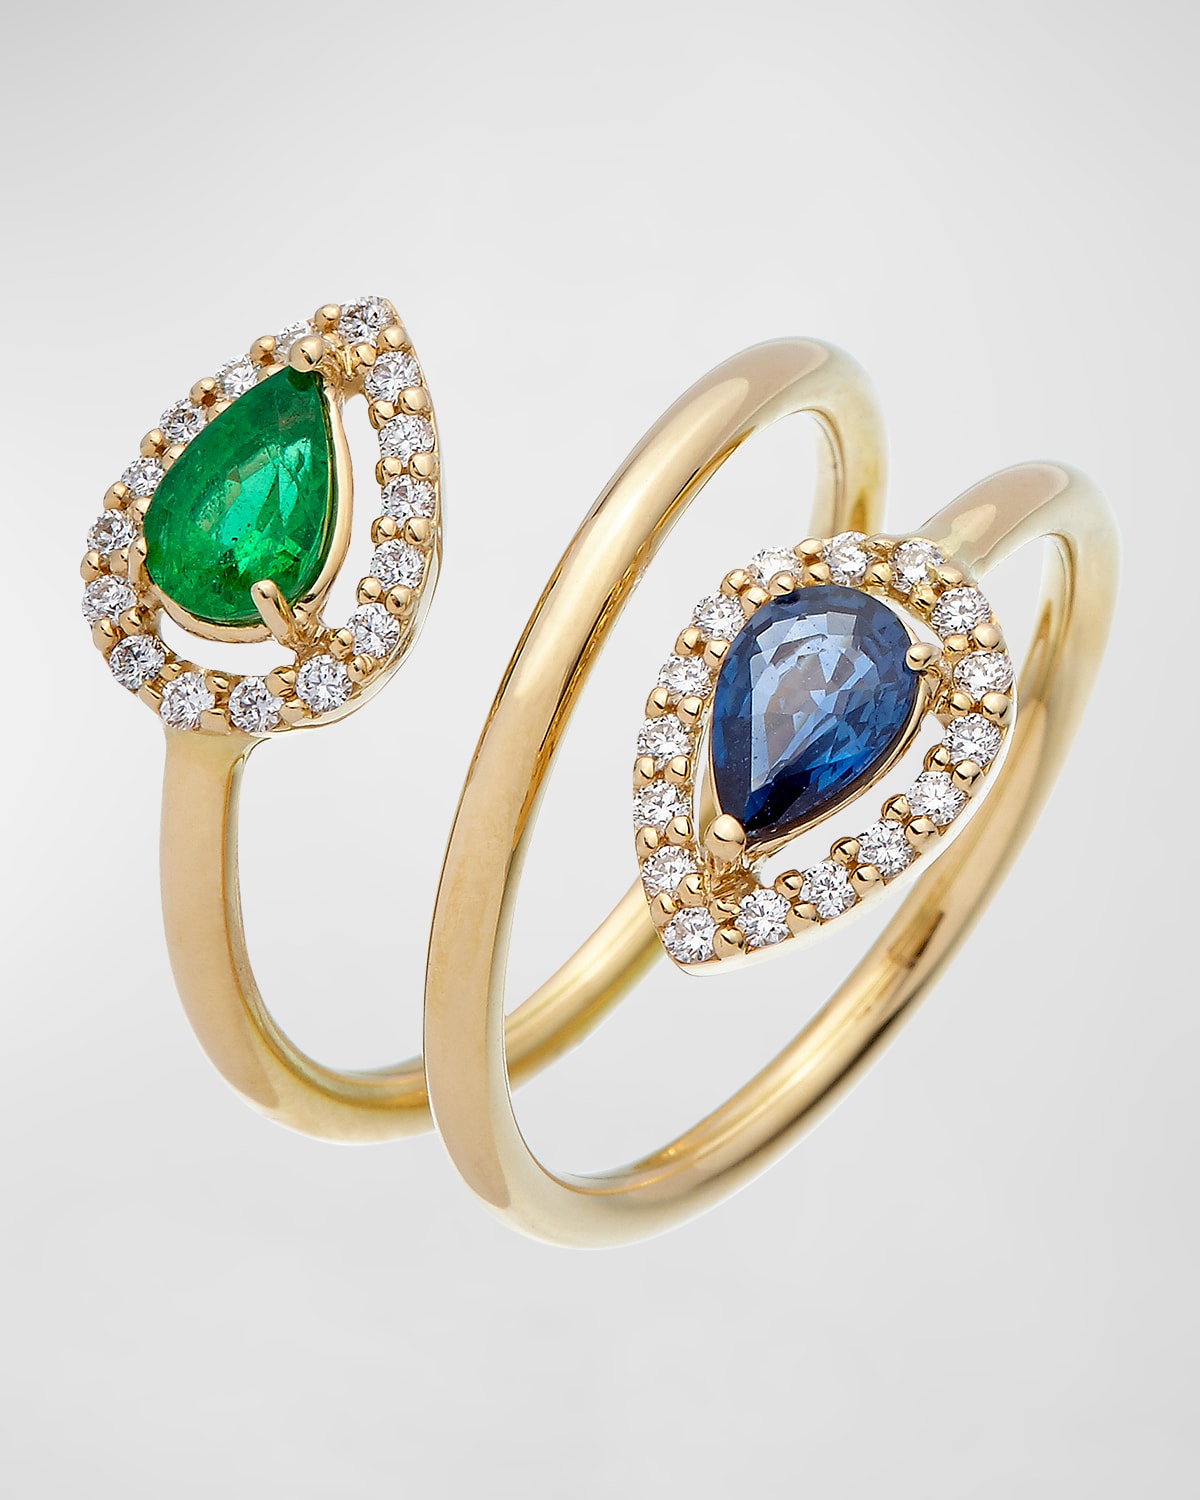 Krisonia 18k Yellow Gold Ring With Emerald, Sapphire And Diamonds